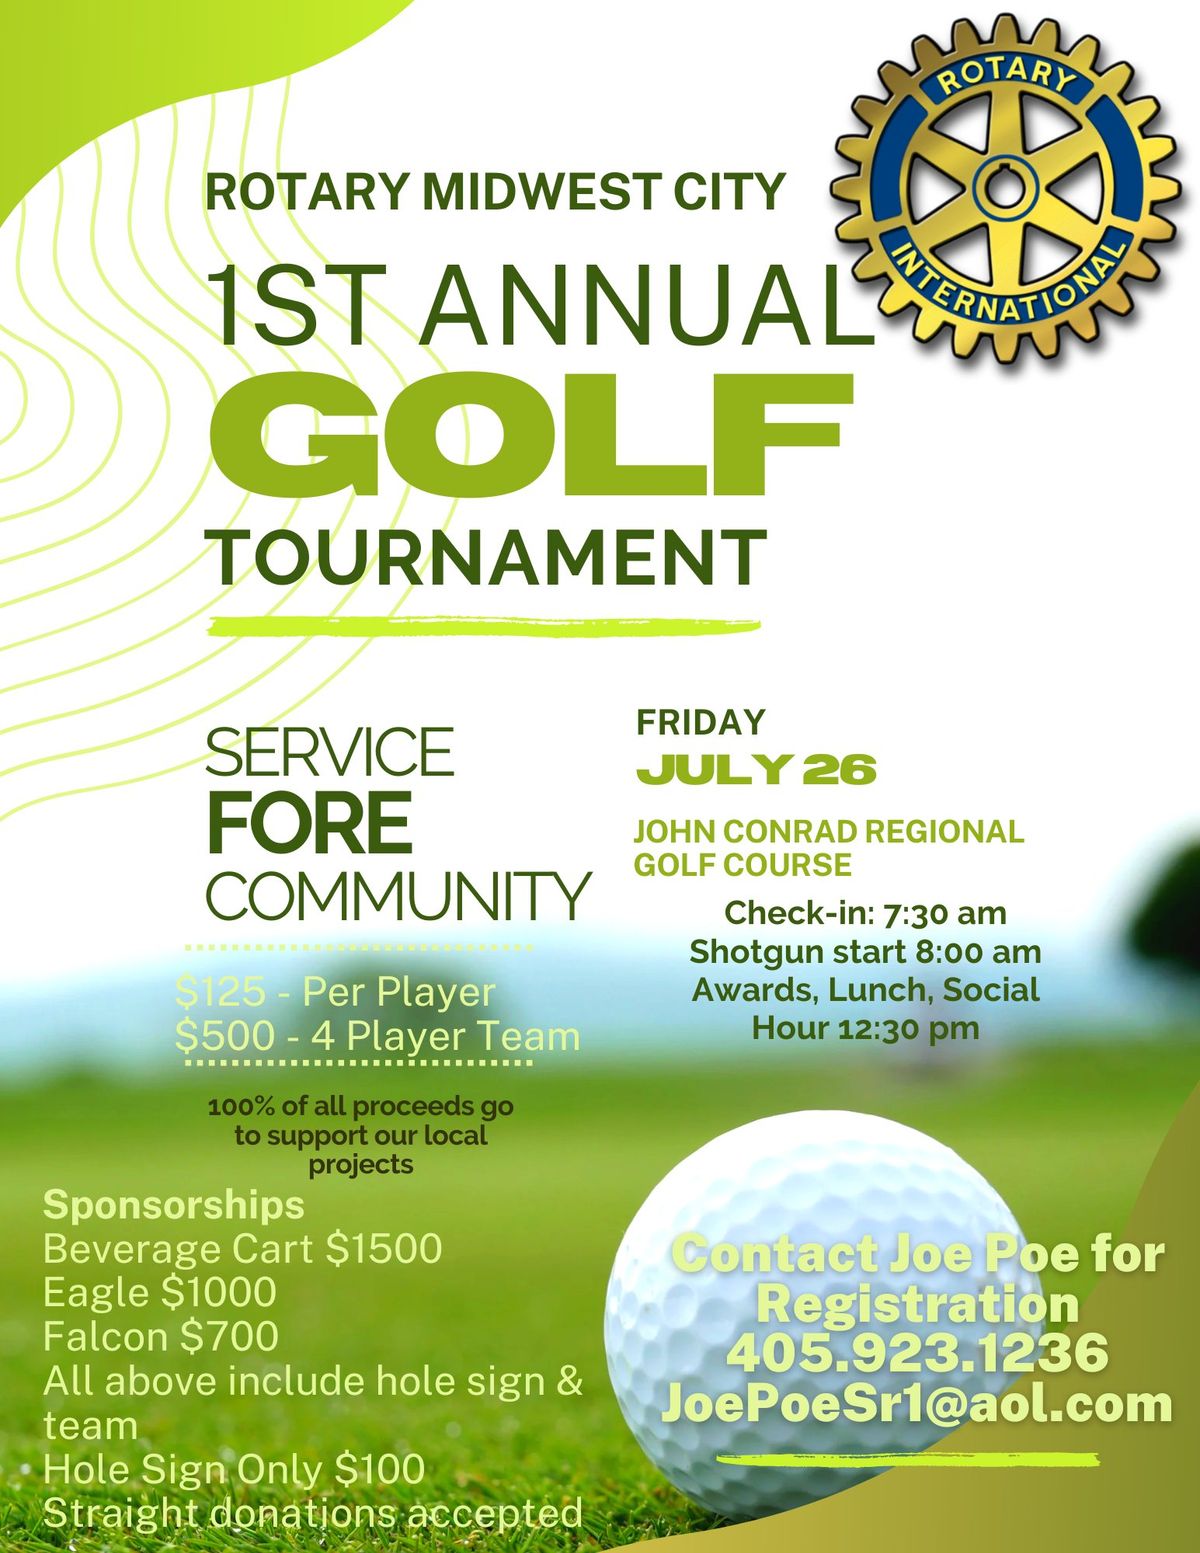 MWC Rotary 1st Annual Golf Tournament